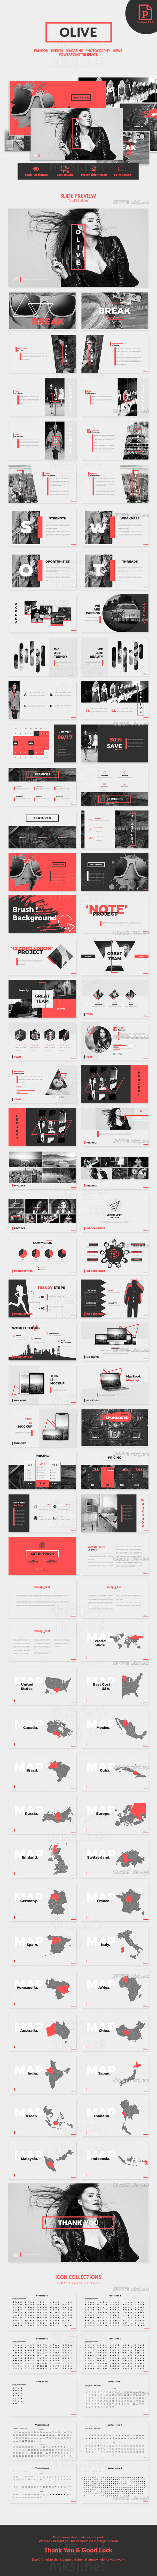 PPT模板 olive creative powerpoint template